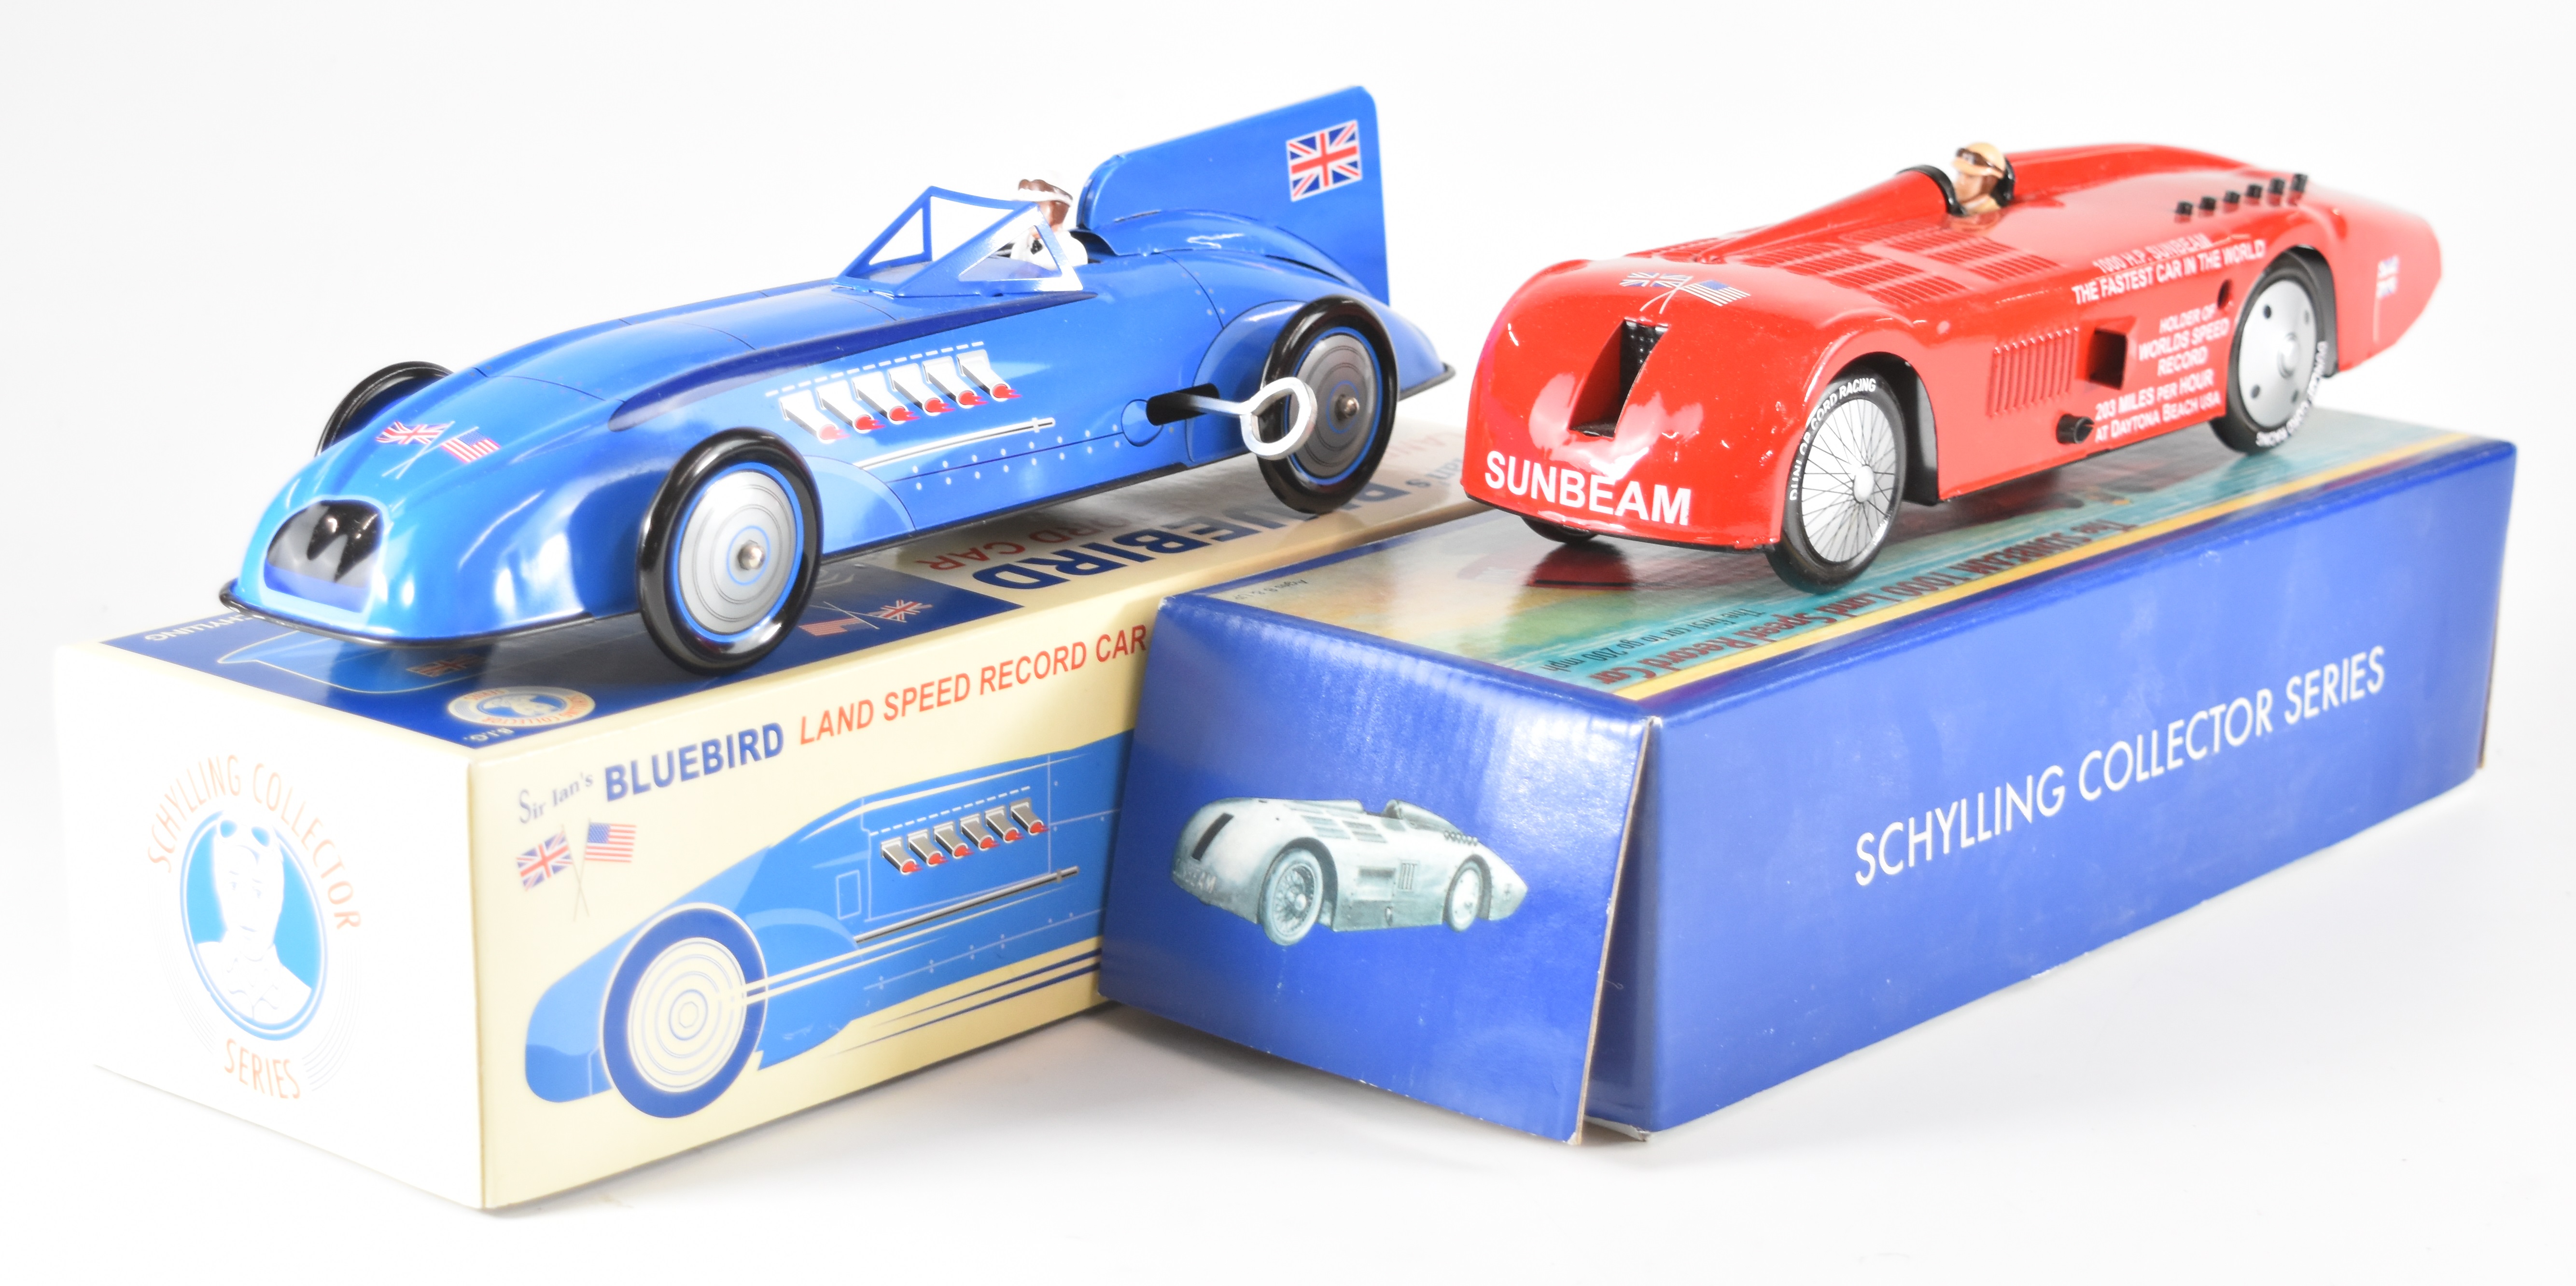 Two Schylling Collector Series tinplate land speed record cars comprising Sir Ian's Bluebird and The